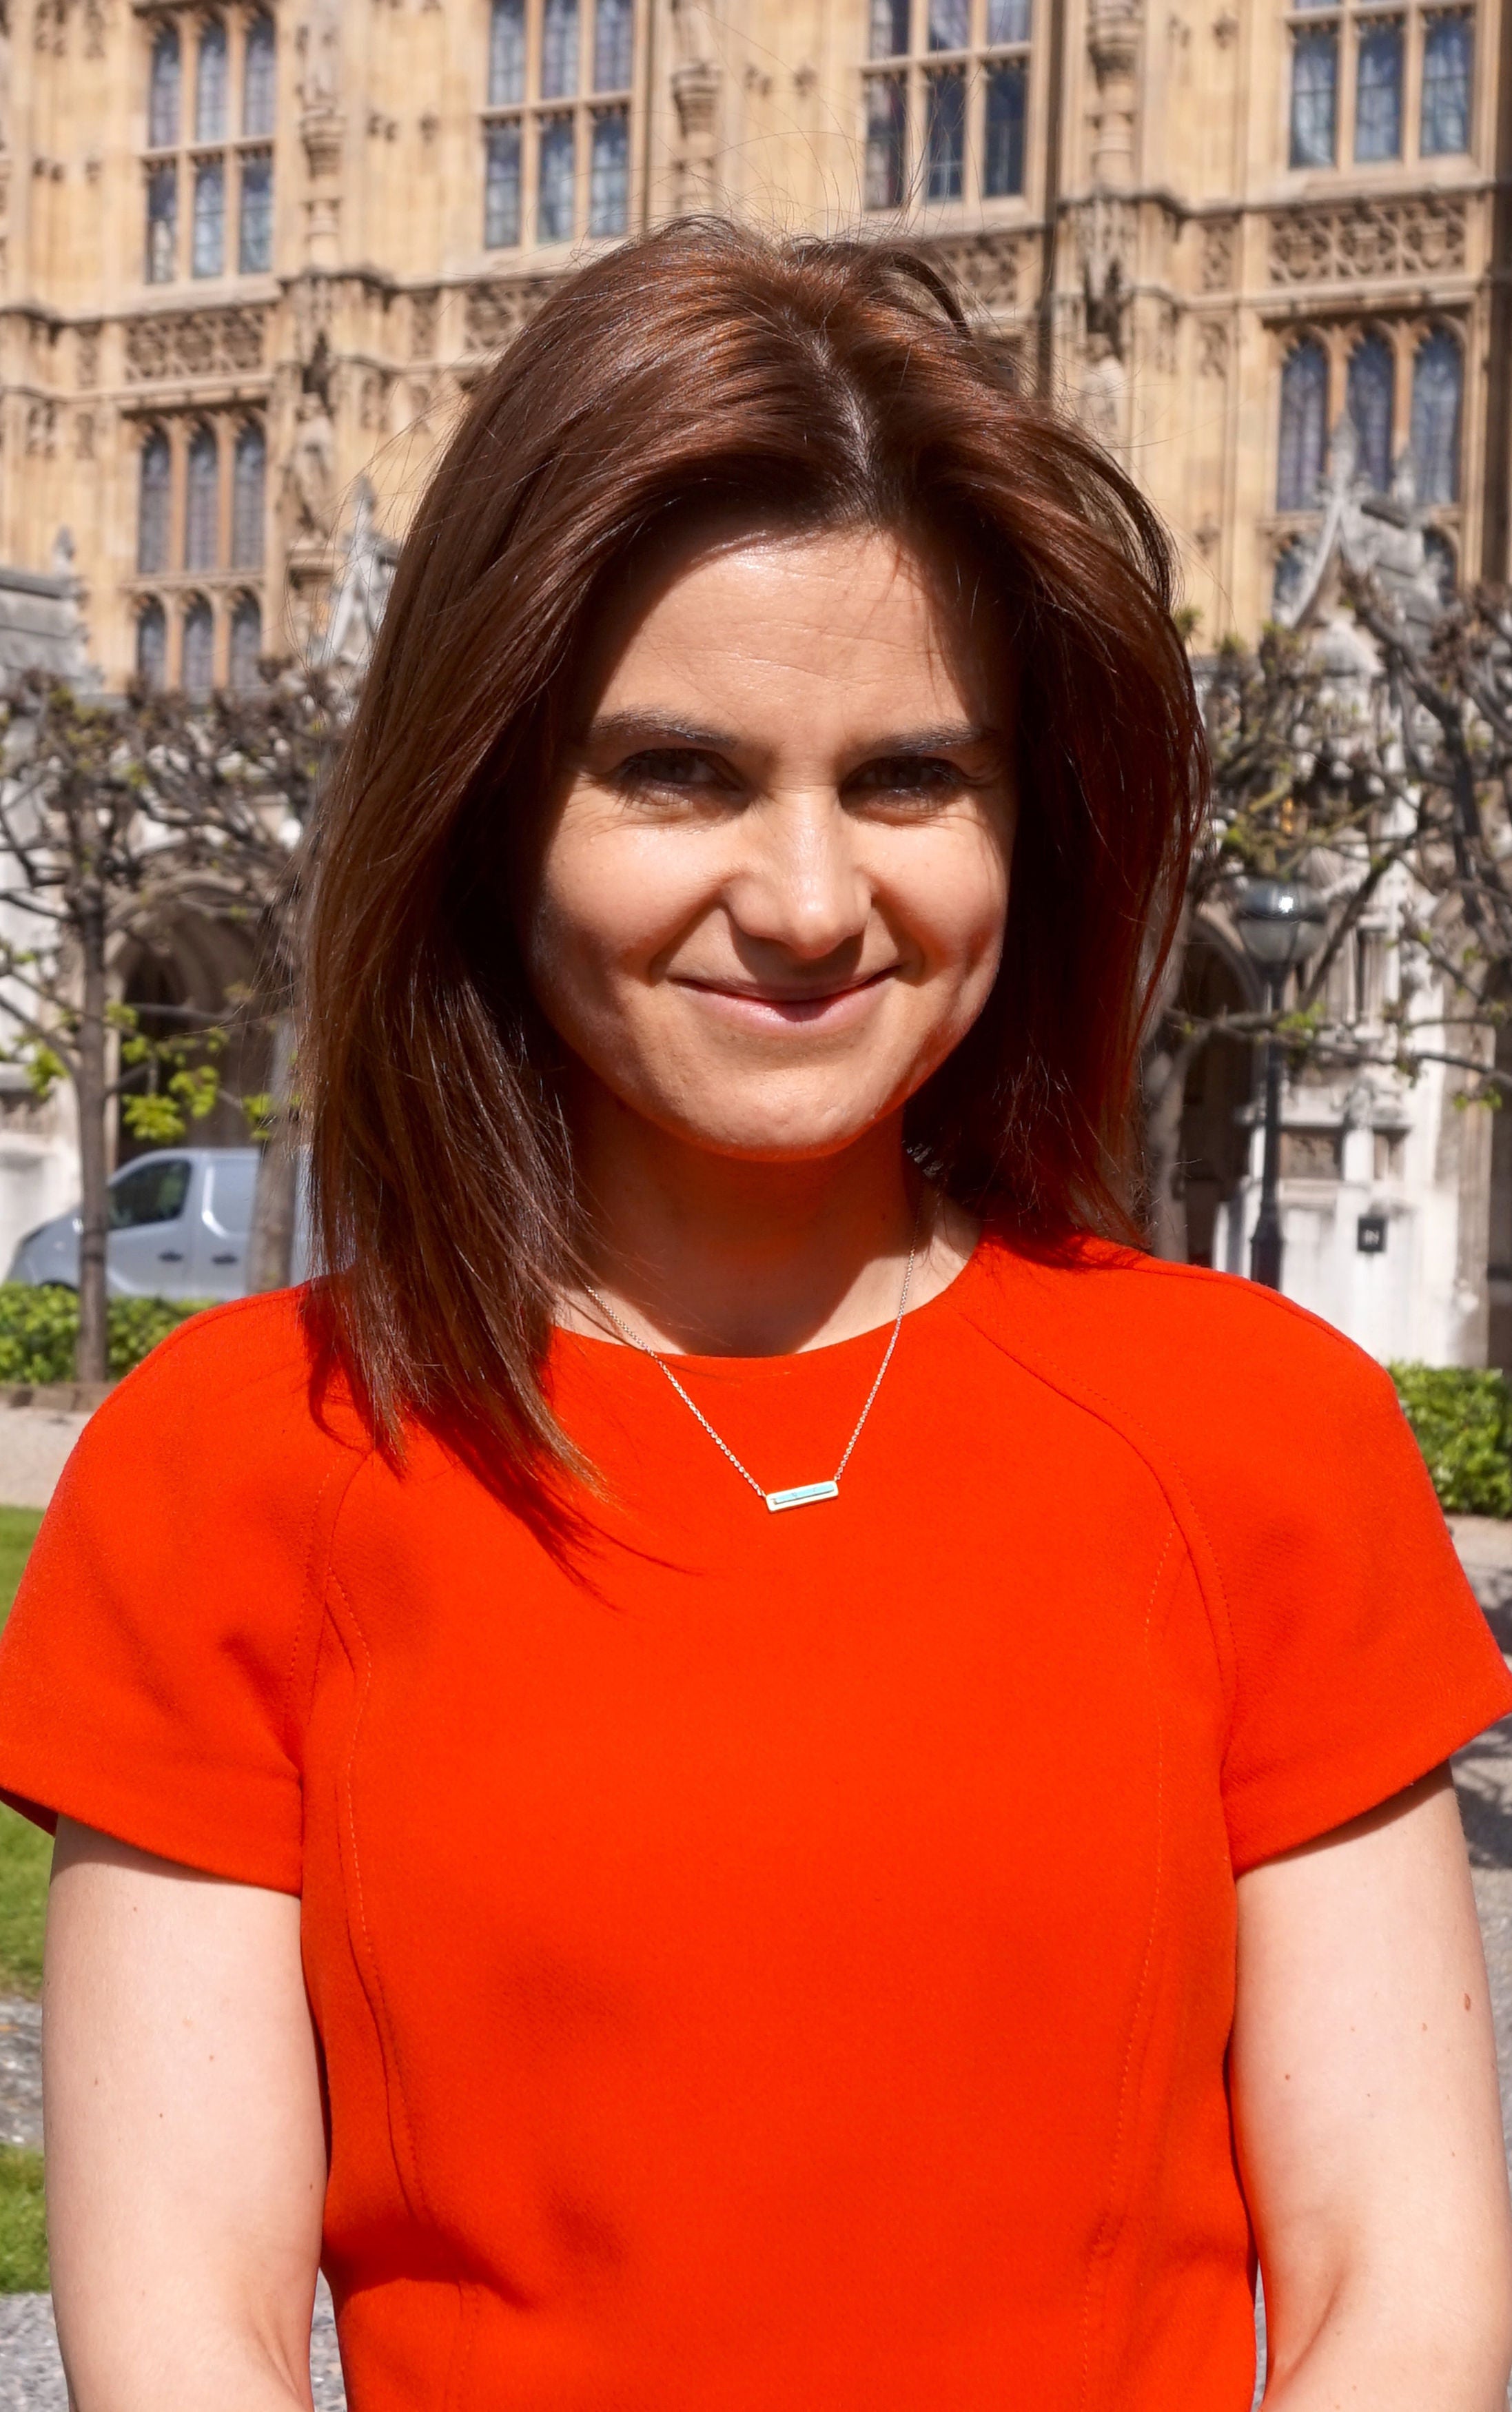 Jo Cox served as an MP from May 2015 until her death in June 2016